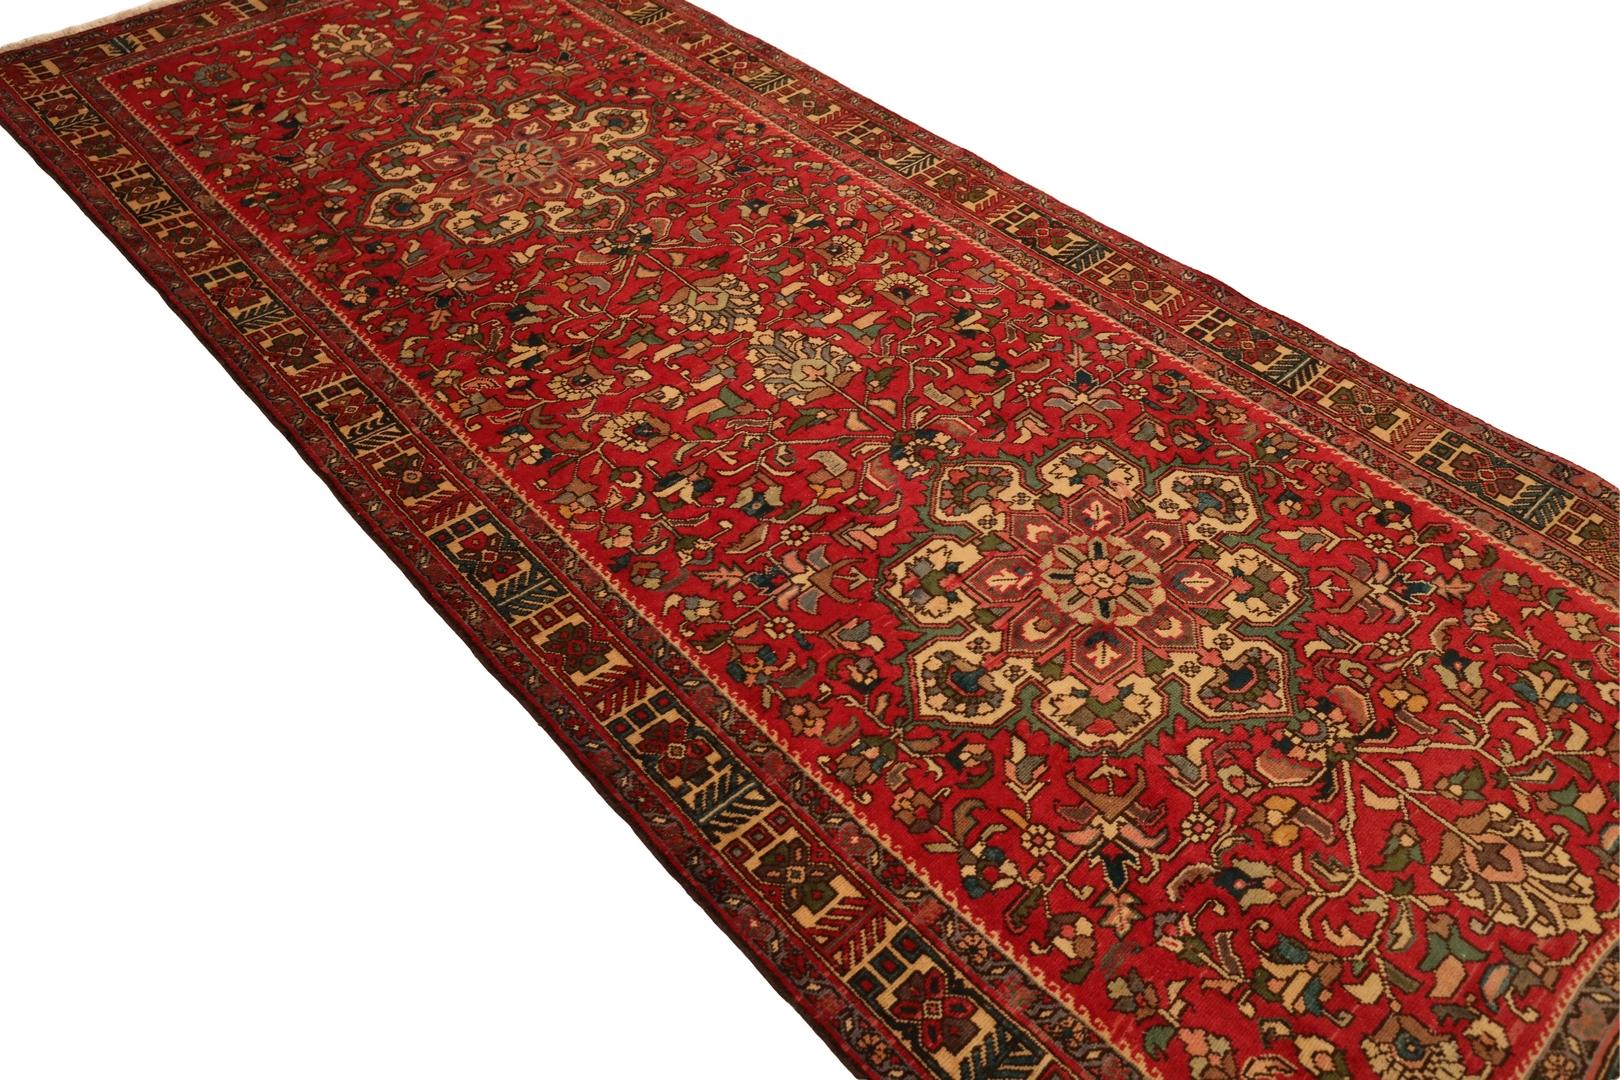 Hand-Knotted North-West Persian Semi-Antique Runner - 4'10